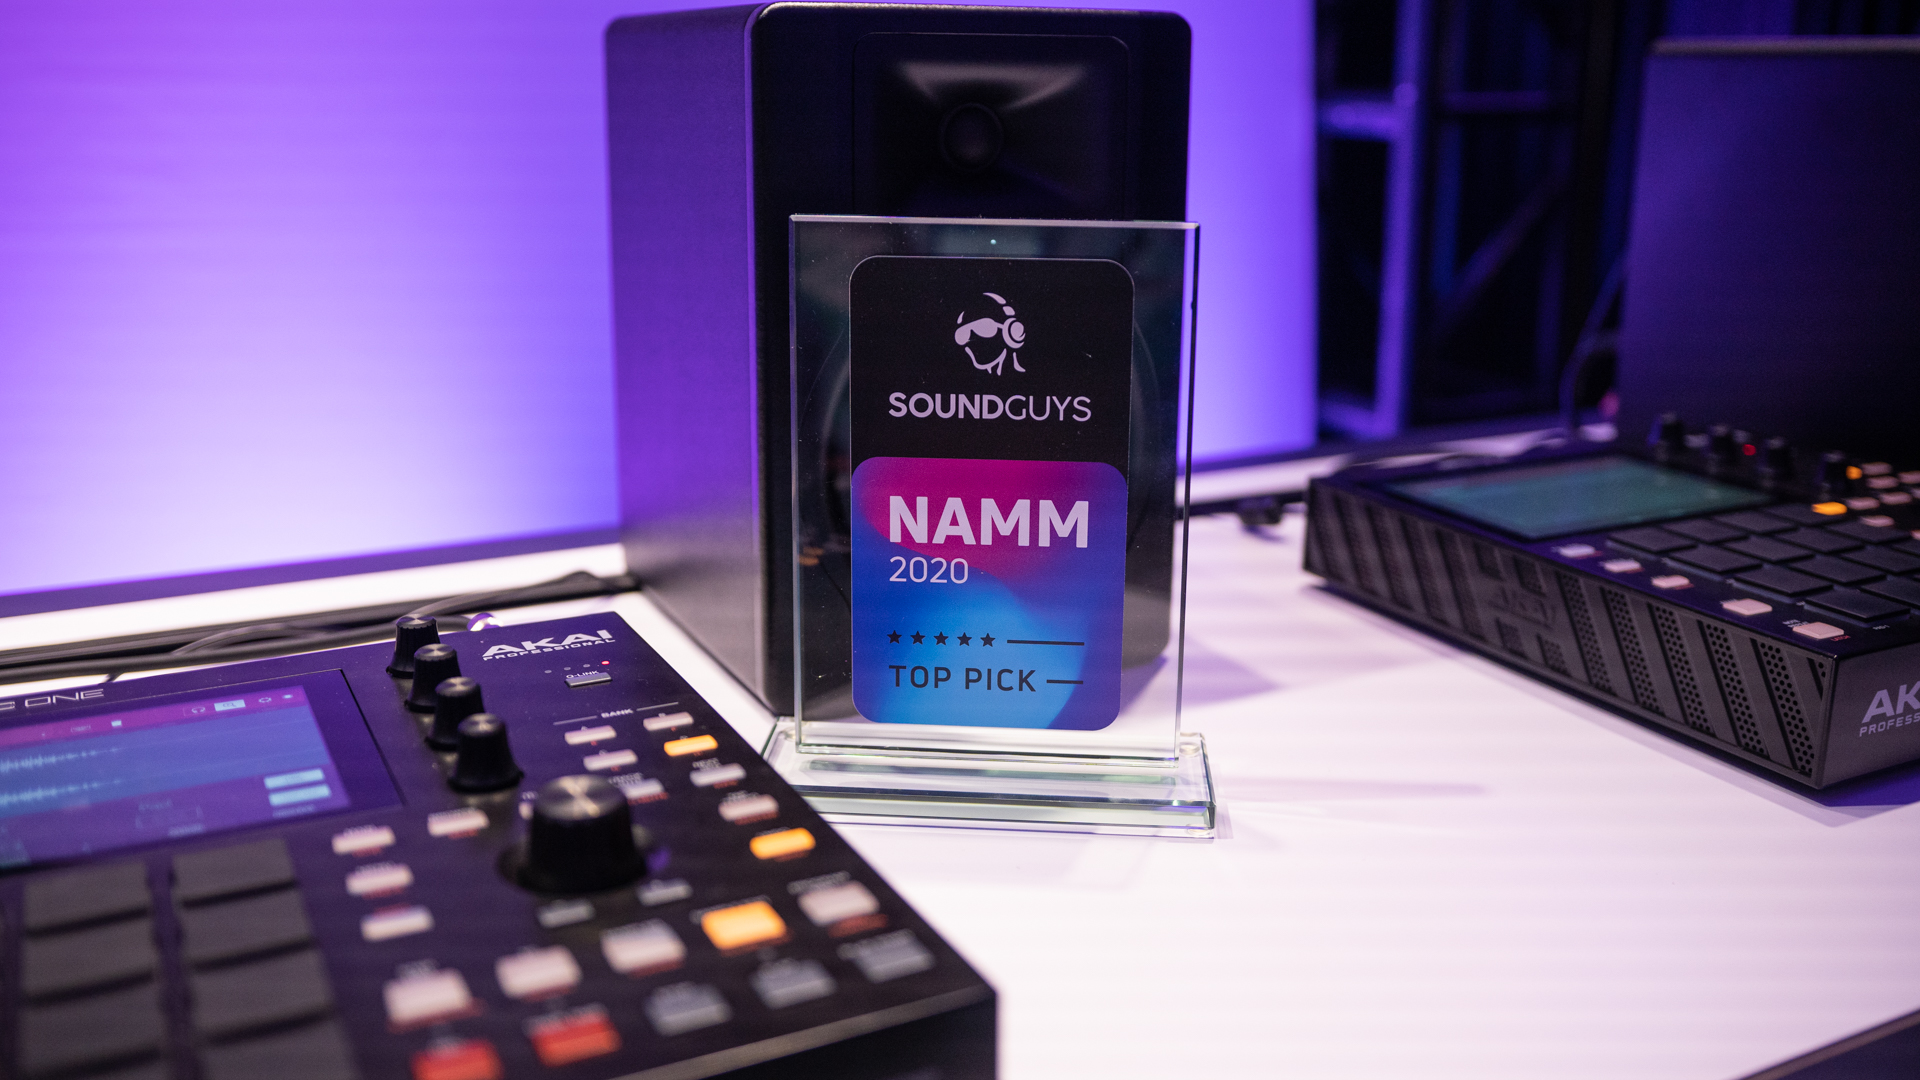 The new Akai MPC One pictured on a desk next to the best of NAMM 2020 SoundGuys award. 